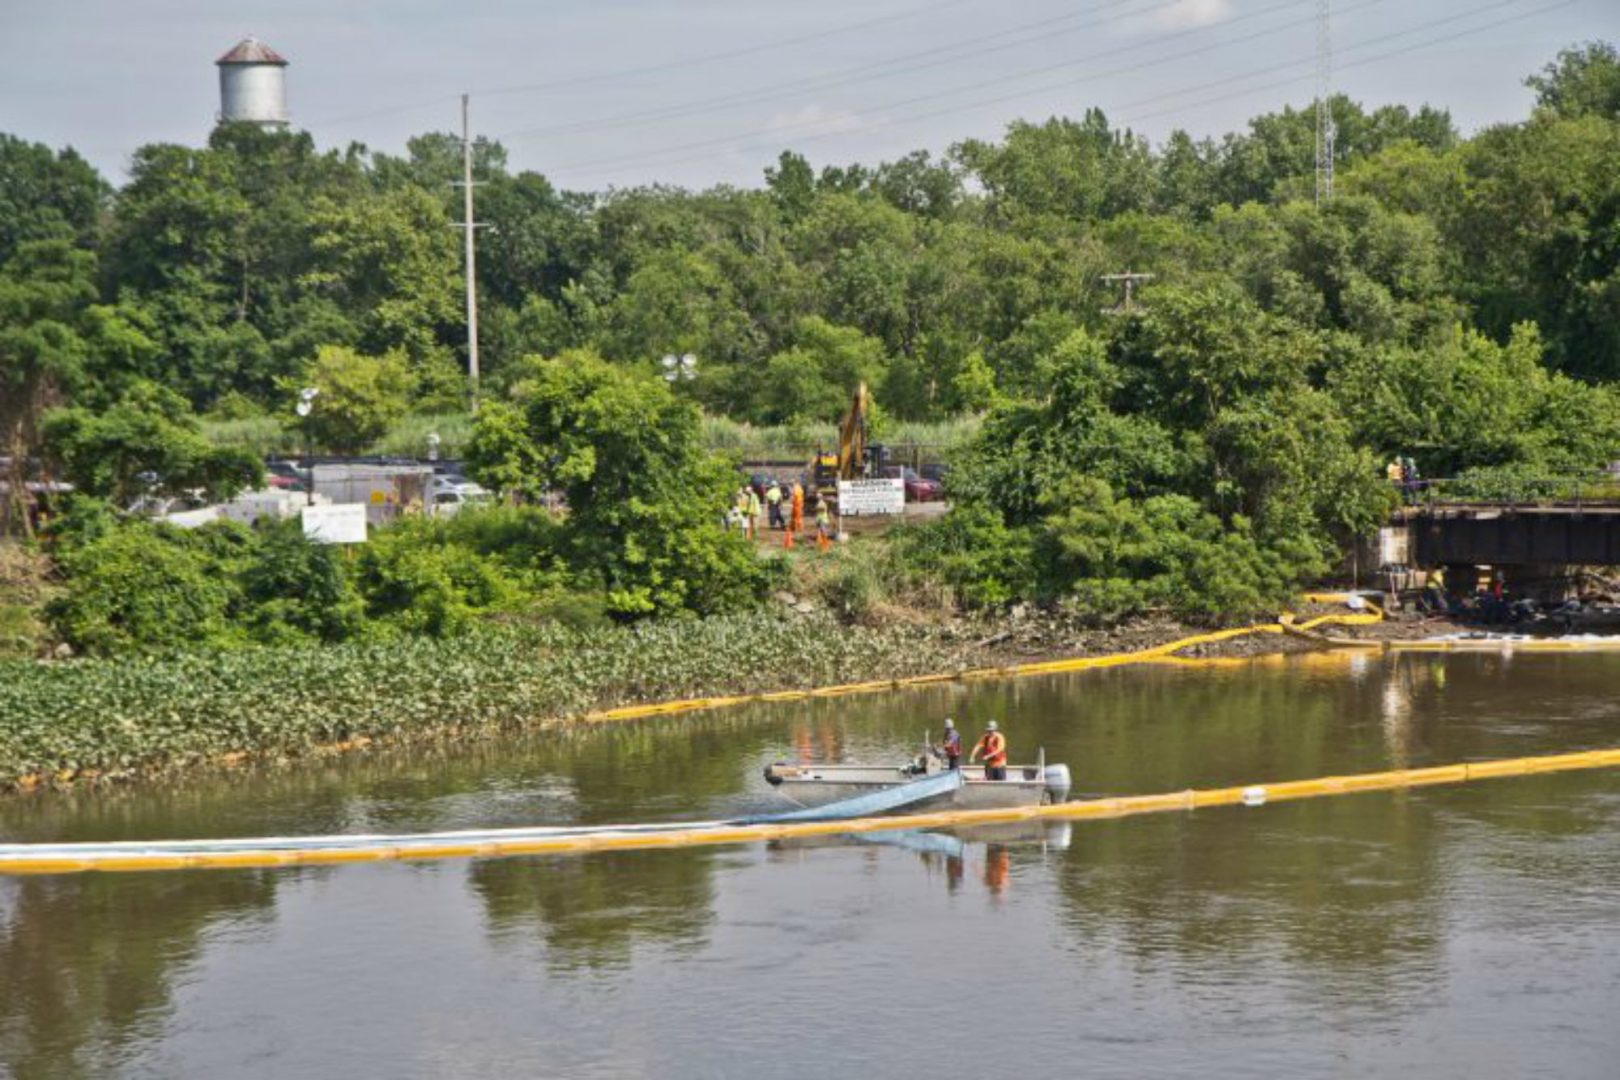 An environmental cleanup crew works to remove fuel from a spill in Darby Creek in Tinicum Township, Pennsylvania, near the Philadelphia International Airport. Sunoco plans to use this same line to ship natural gas liquids until construction along the Mariner East 2 is completed.